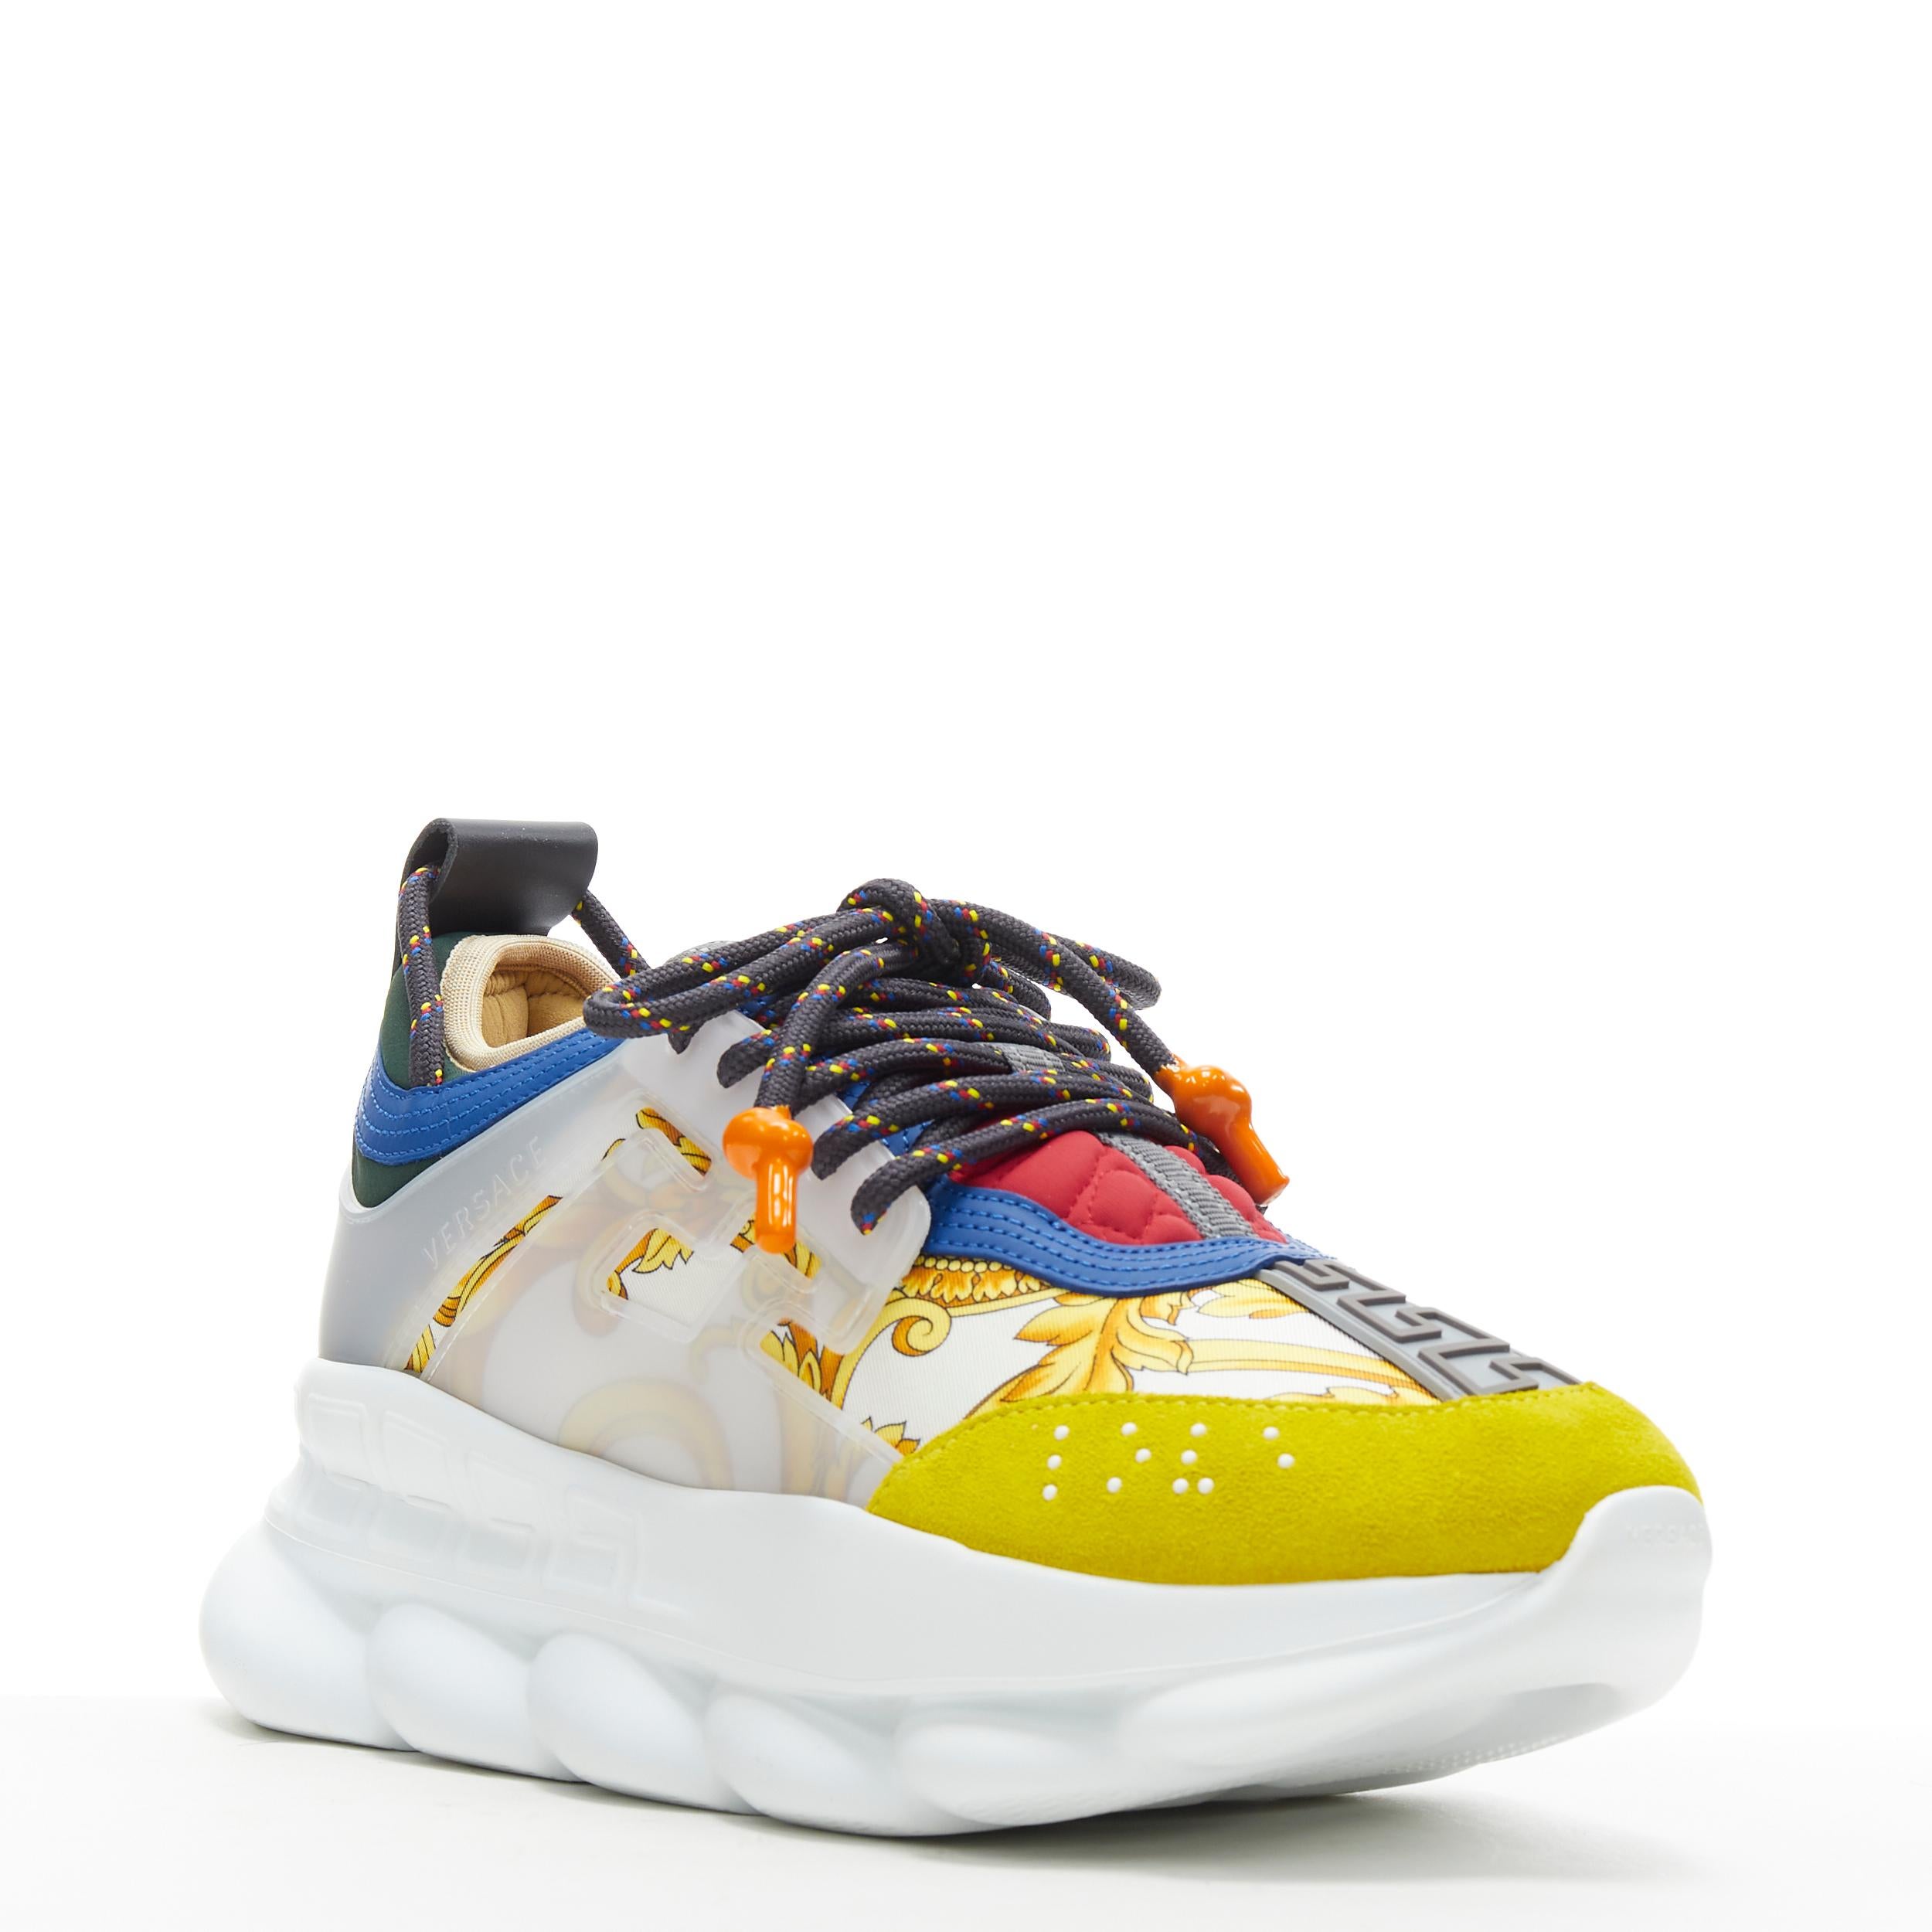 new VERSACE Chain Reaction White Barocco Gold low chunky sole sneaker EU40 US7 Reference: TGAS/B00972 
Brand: Versace 
Designer: Salehe Bembury 
Model: Chain Reaction White Barocco 
Material: Leather 
Color: Gold 
Pattern: Solid 
Closure: Lace up